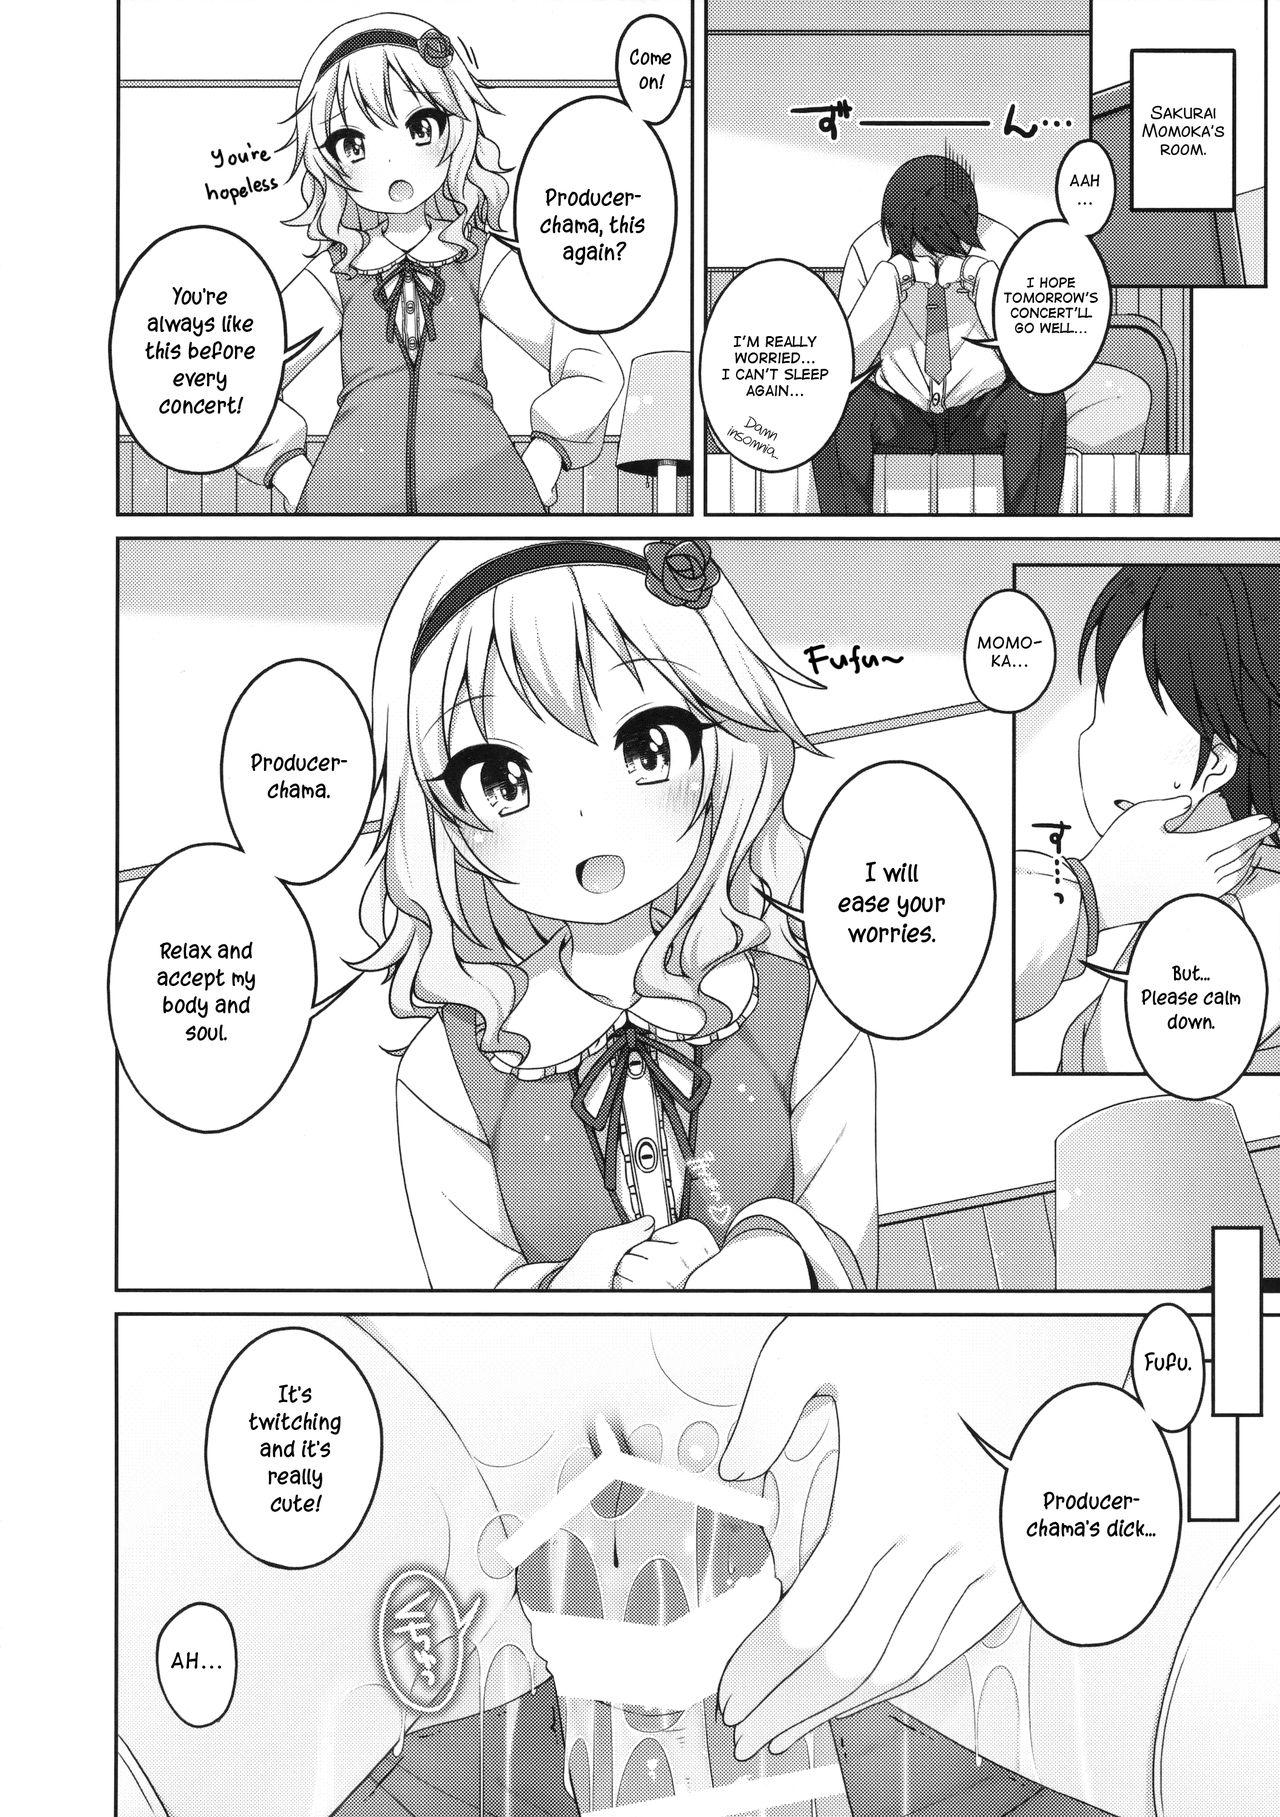 Stepsiblings Live no Mae no Hi wa | The day before the concert - The idolmaster Gay Longhair - Page 7